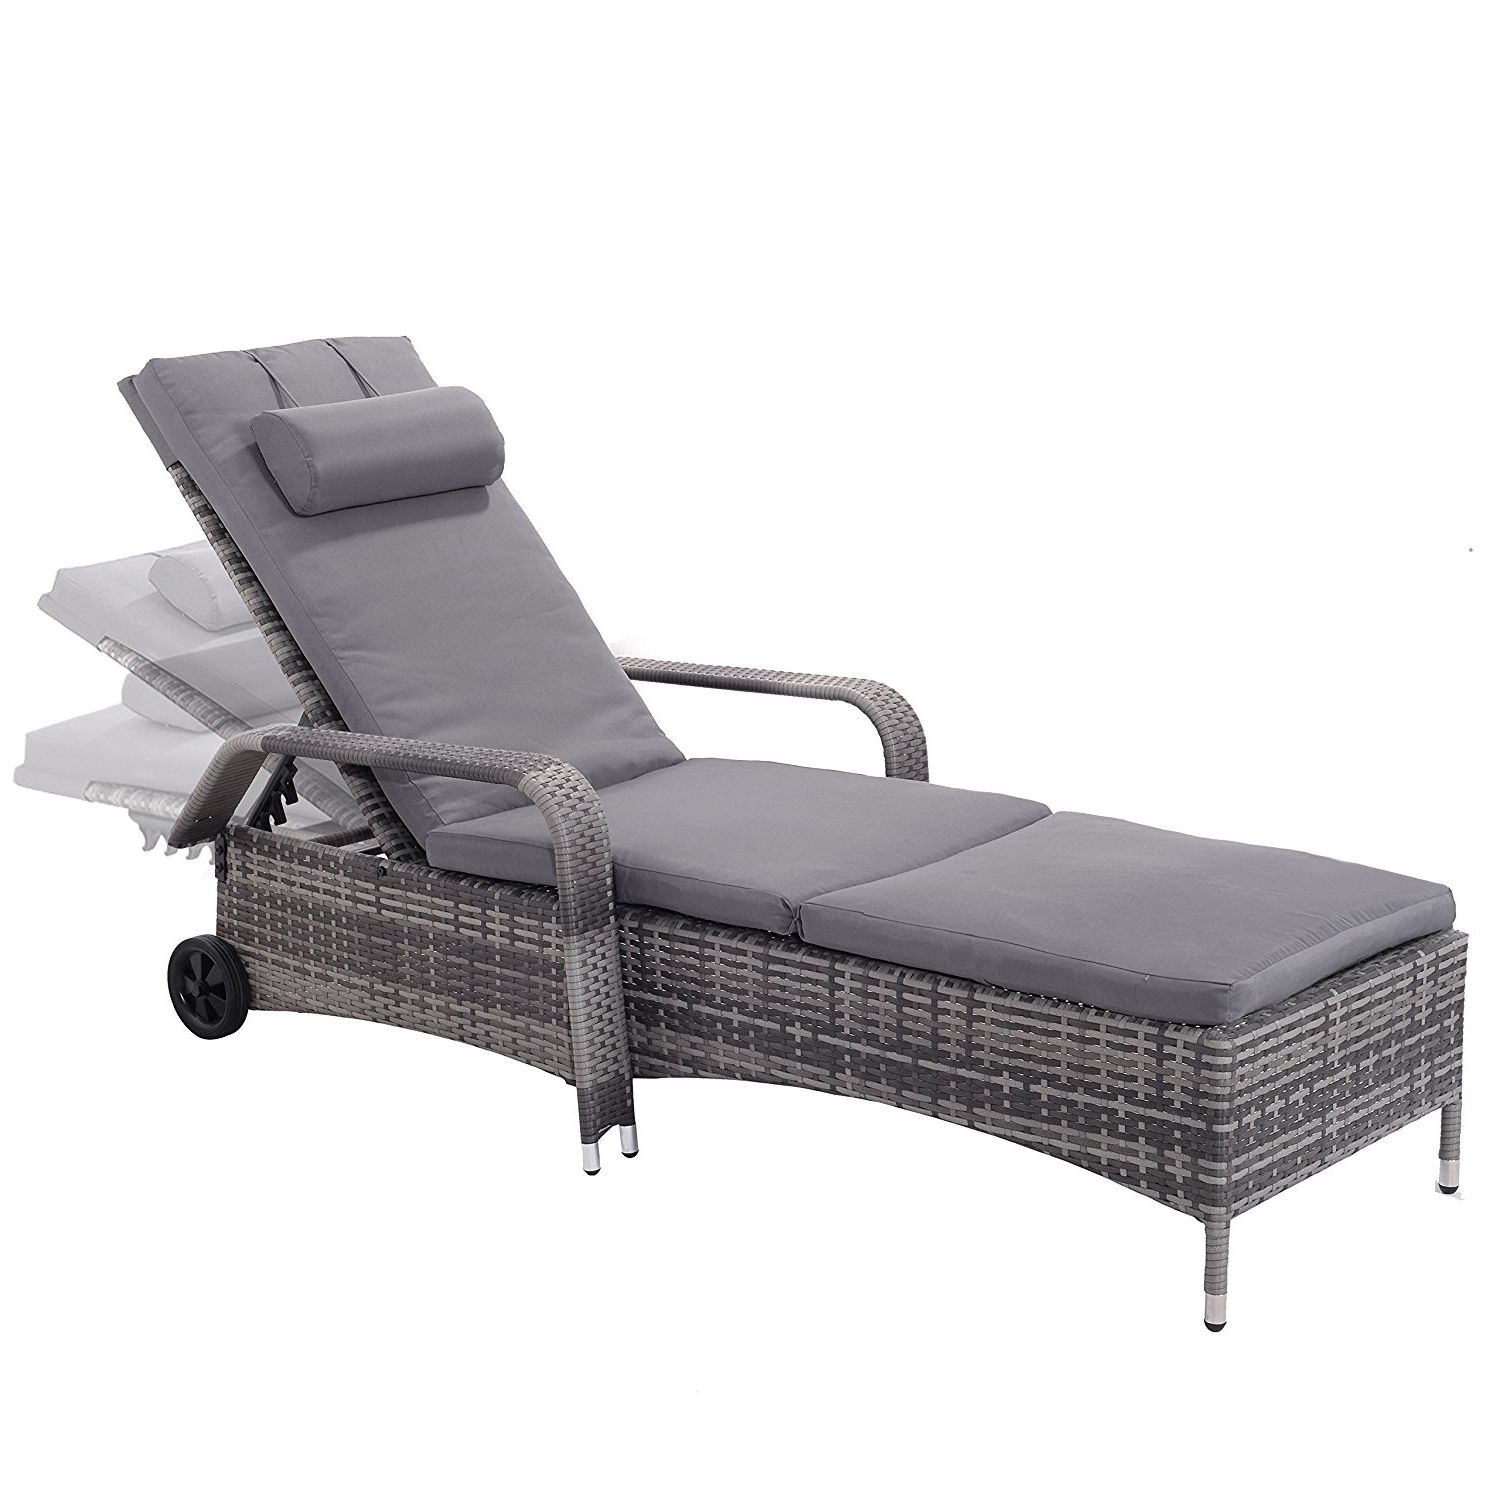 Well Liked Grey Wicker Chaise Lounge Chairs Pertaining To Amazon: Tangkula Wicker Chaise Lounge Chair Outdoor Patio (View 7 of 15)